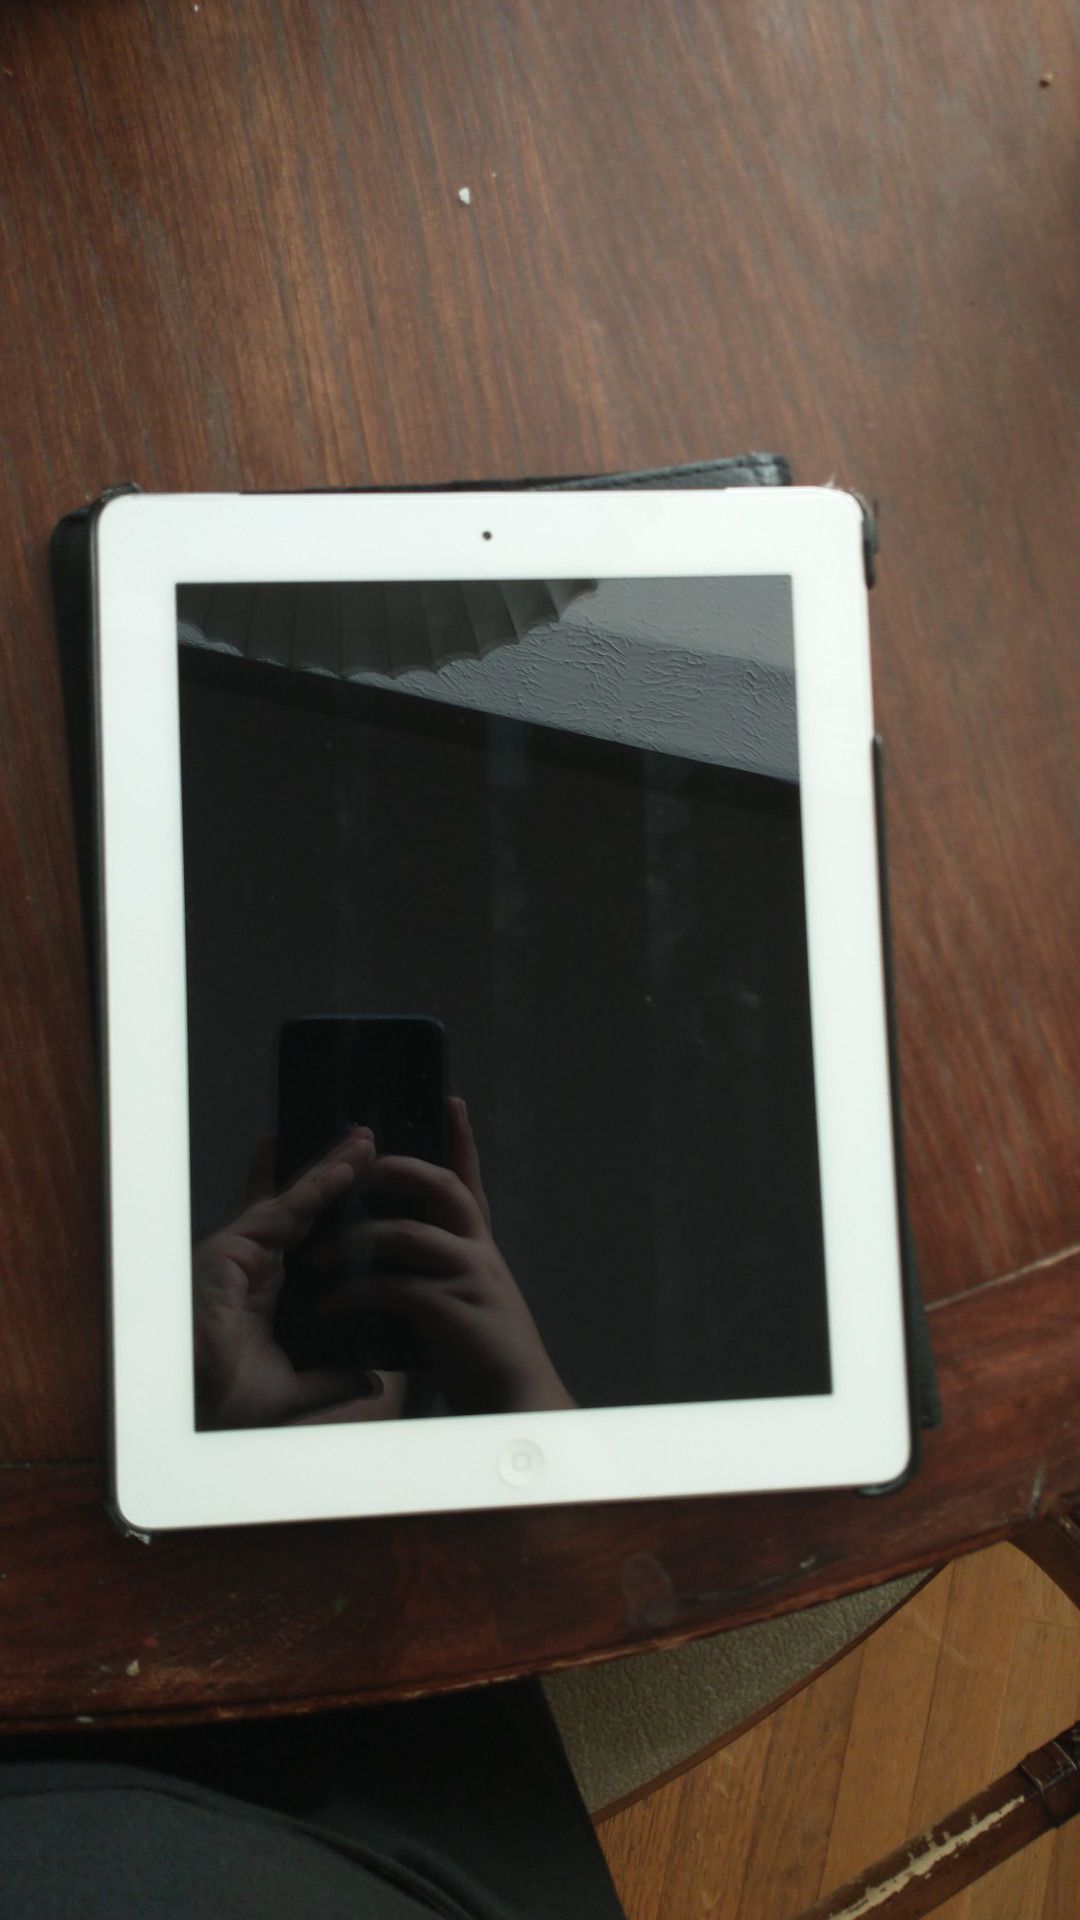 Ipad generation 3 for cheap! Barely used!